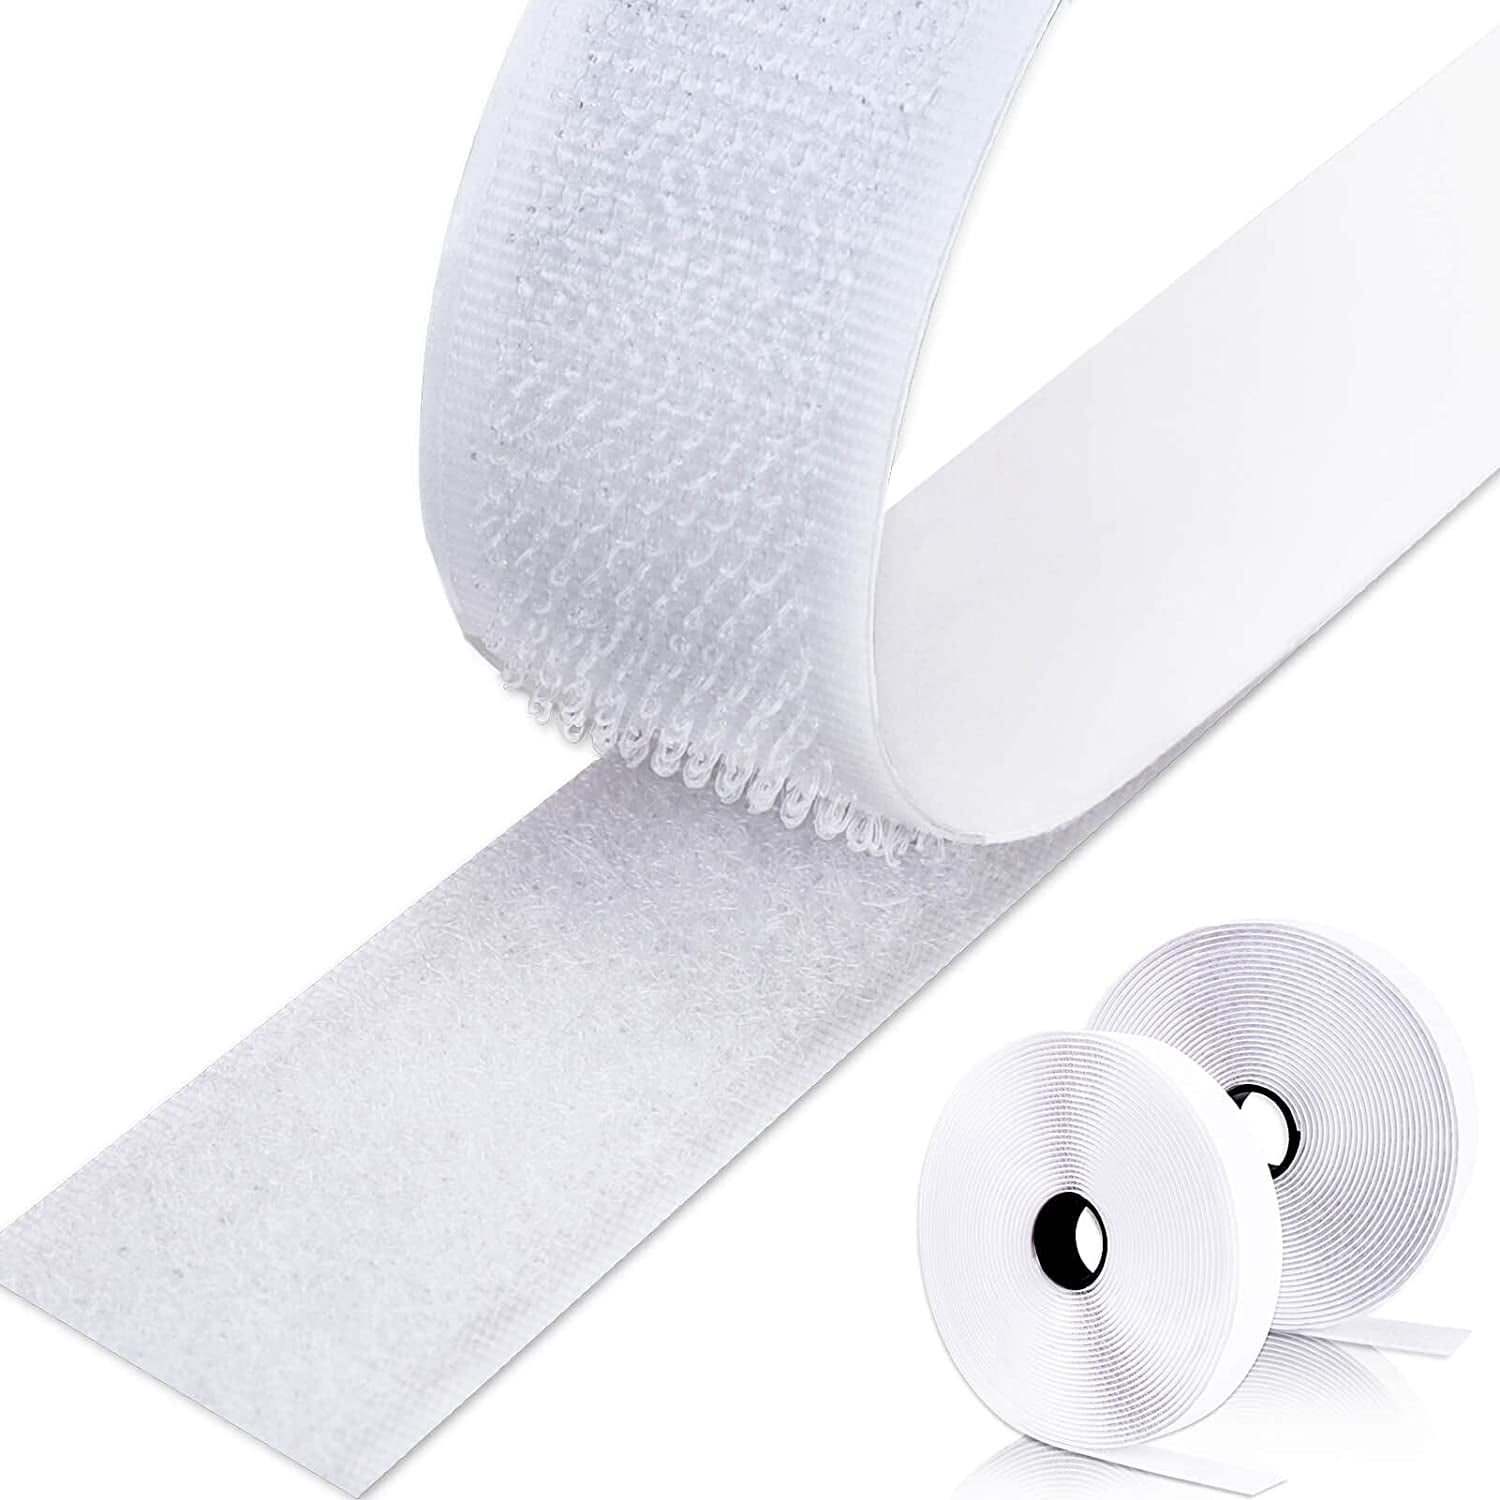 Mcury 8M Double Self Adhesive Scratch Strip, Adhesive Scratch Strip Self Adhesive Velcro Tape for Wall Hangings 20mm (White) - Walmart.com